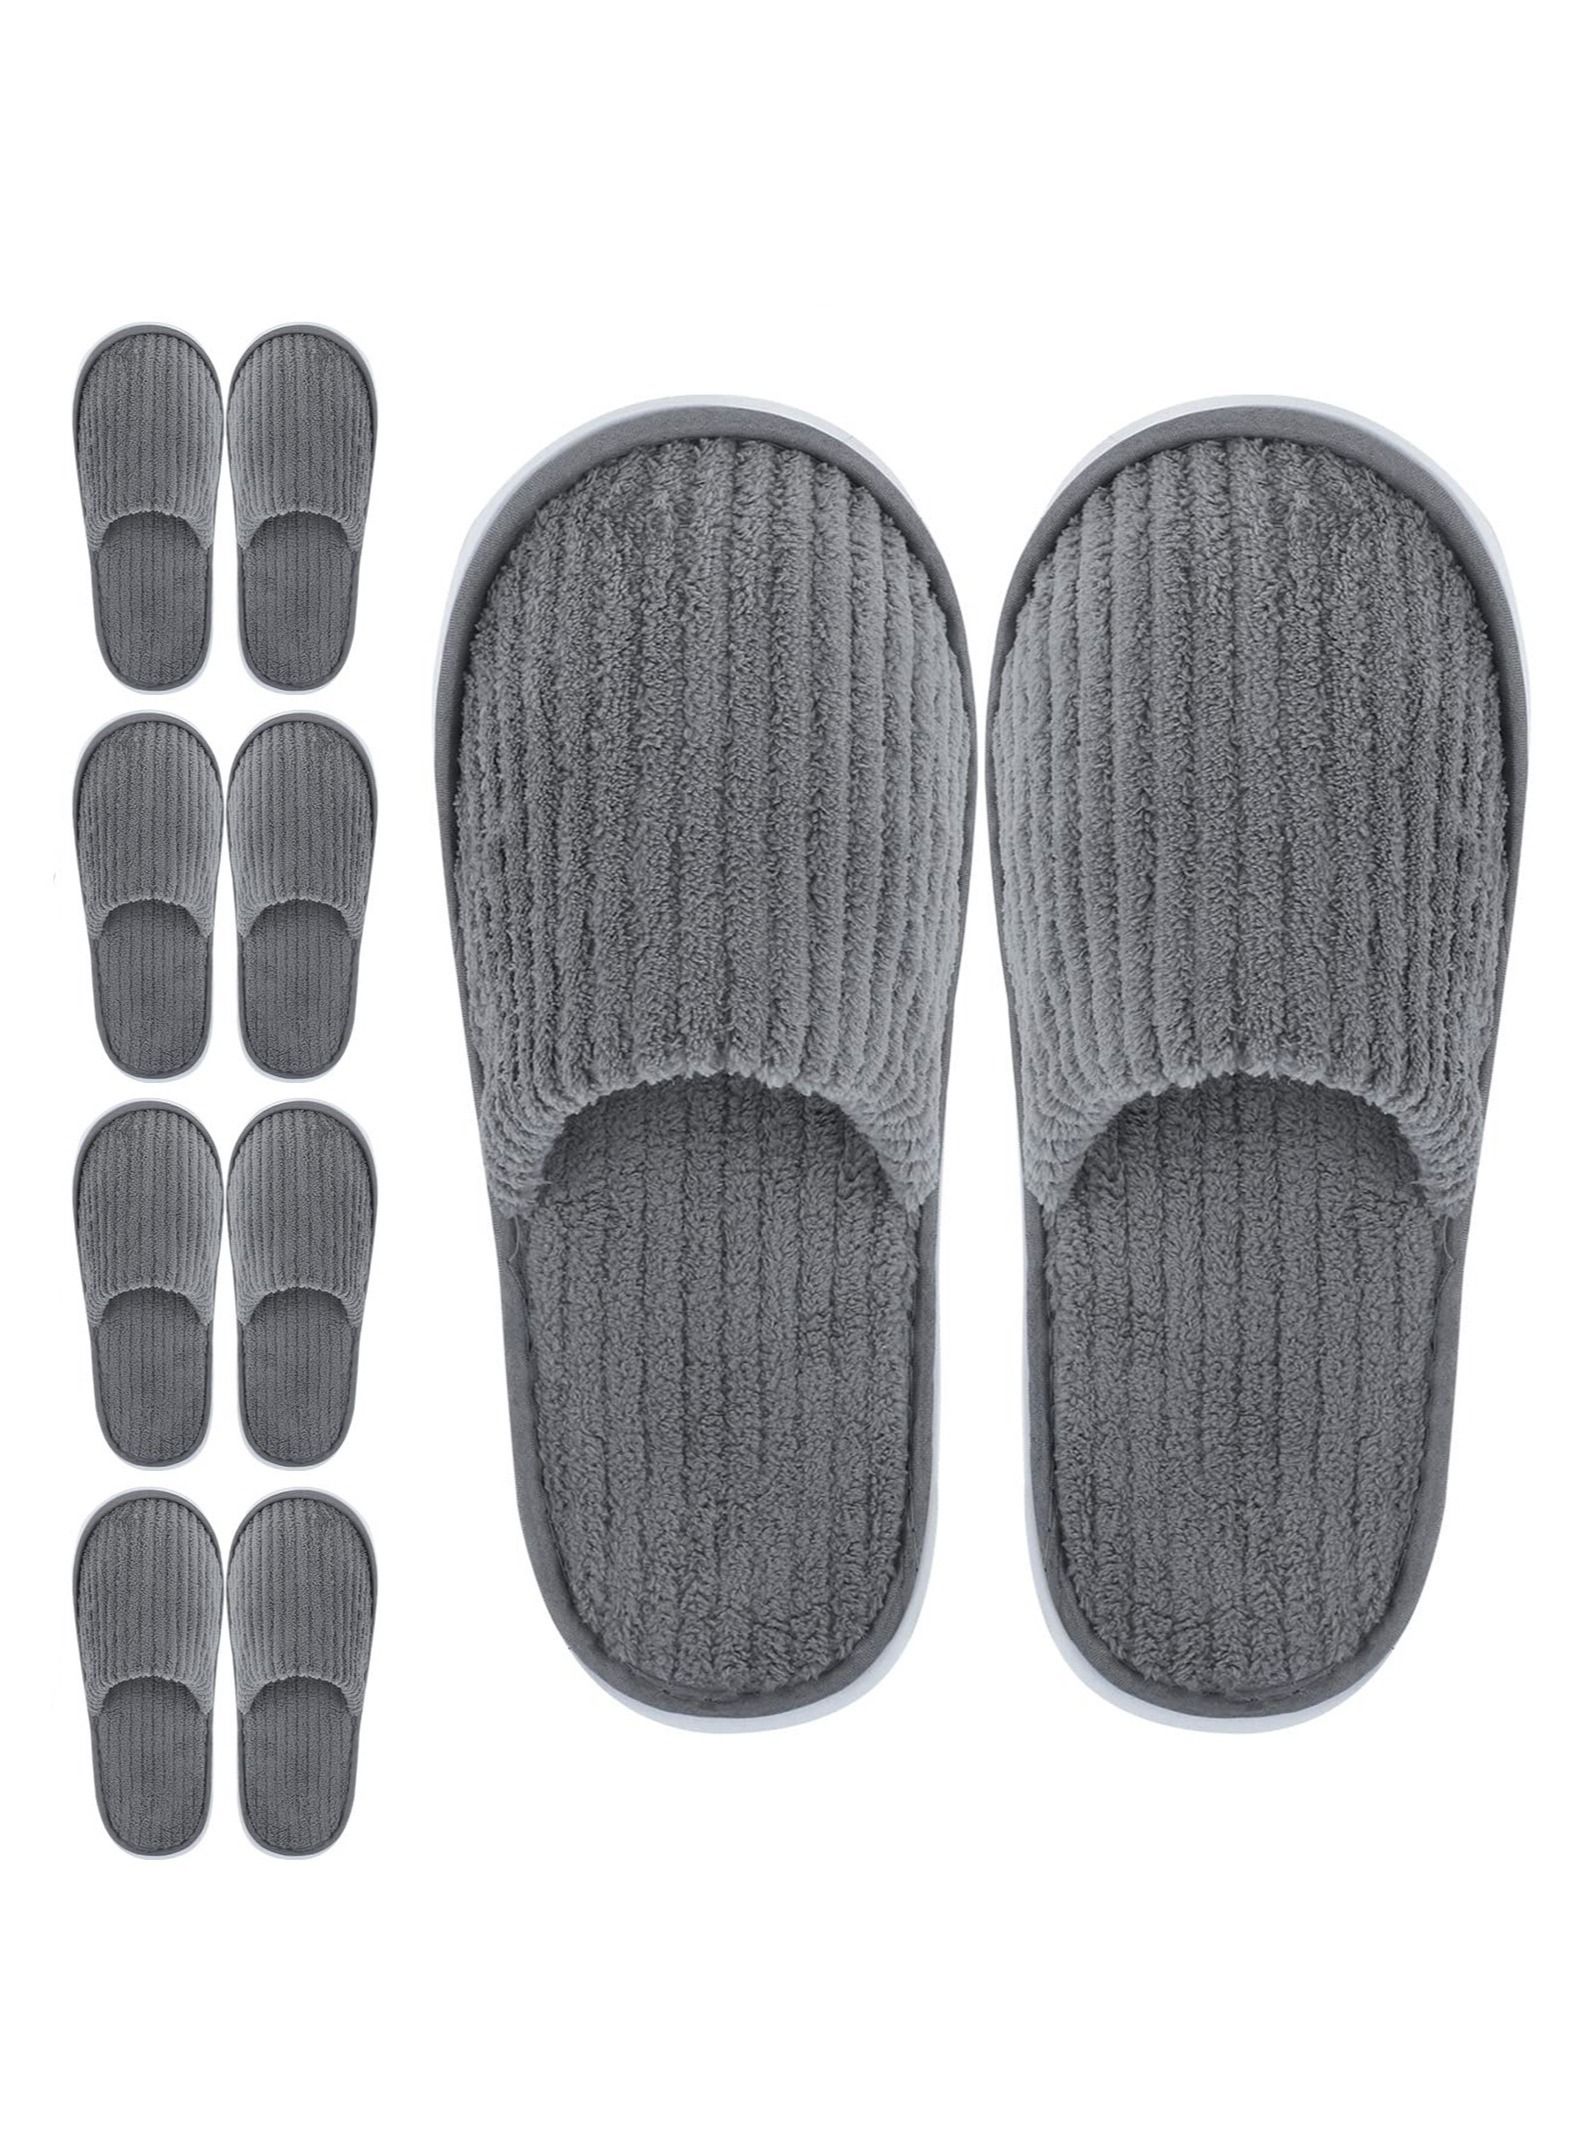 Excefore Disposable Slippers, 5 Pairs Closed Toe Spa Slippers Coral Fleece  Washable Home Slippers for Women Men Guests Hotels House Slippers  Housewarming Party Indoors Bathroom Traveling (Gray) KSA | Riyadh, Jeddah